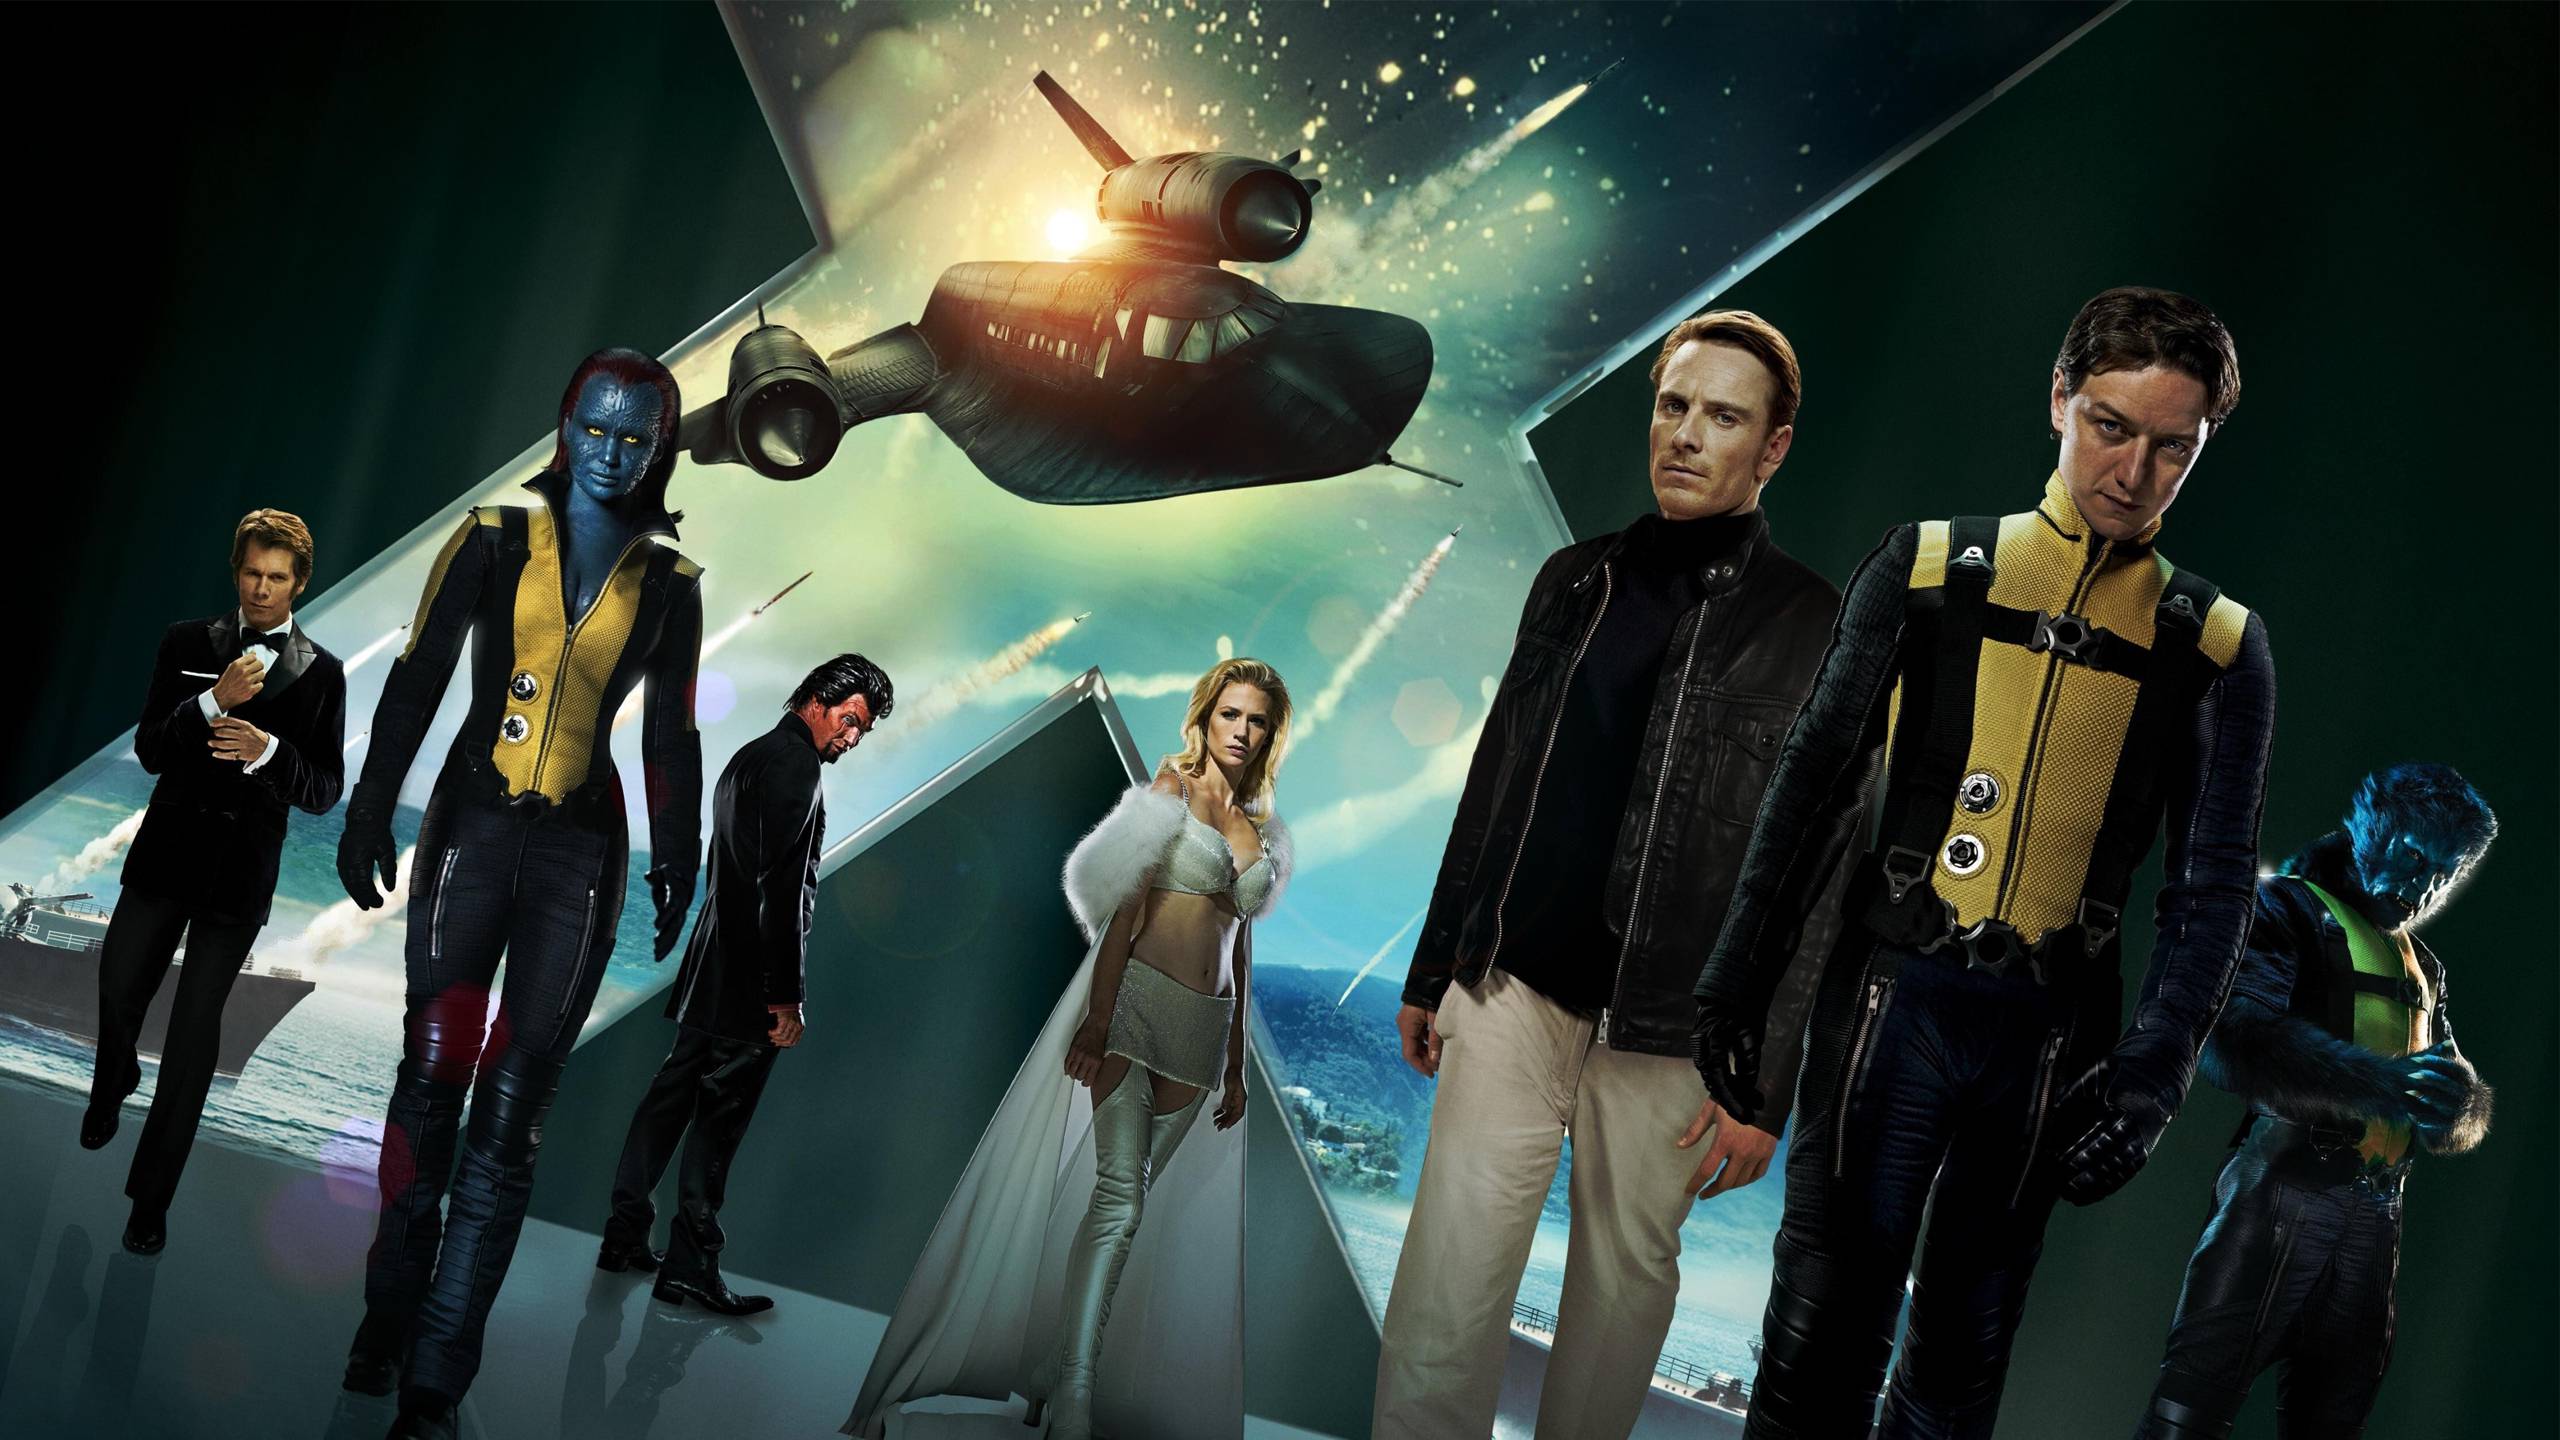 X Men, Movies, Mystique, Beast (character), Magneto, Charles Xavier, Michael Fassbender, James McAvoy, Emma Frost, X Men: First Class Wallpaper HD / Desktop and Mobile Background